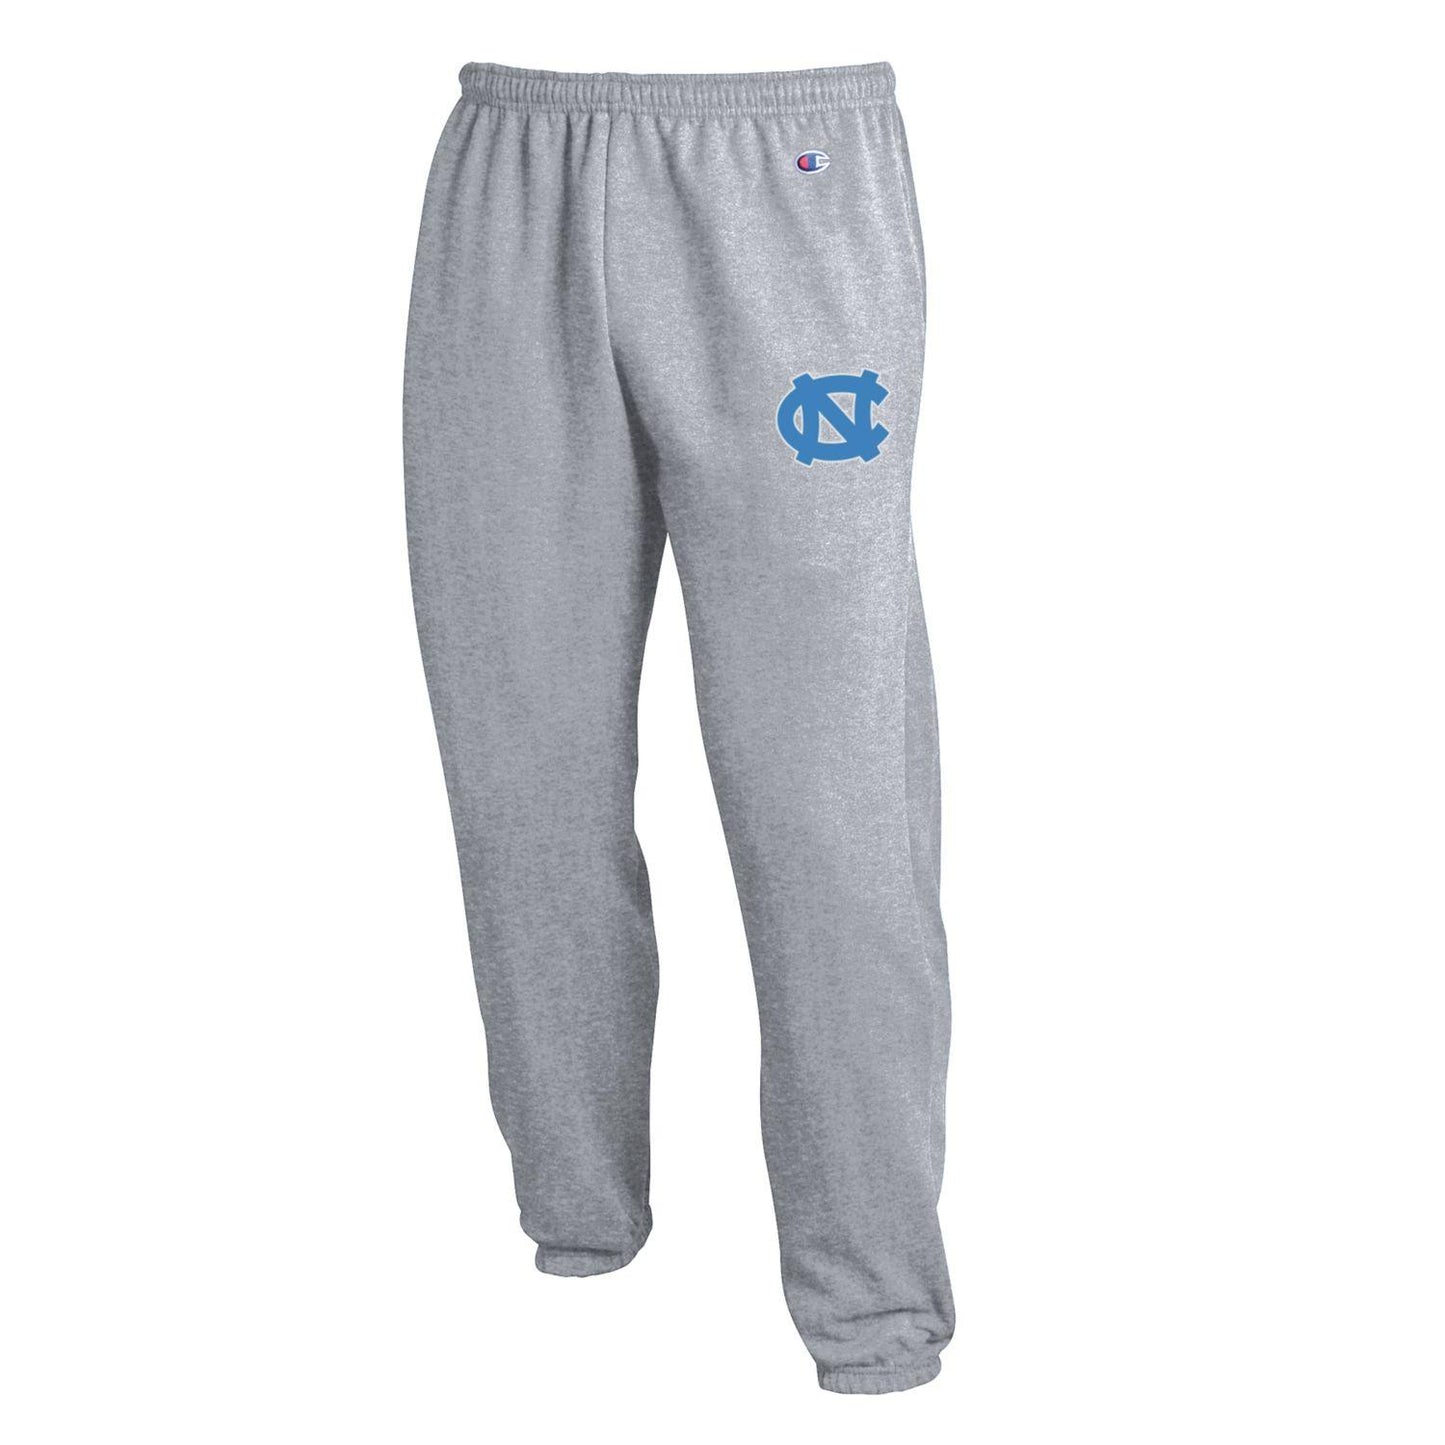 Grey UNC Sweatpants by Champion with banded ankle bottom 